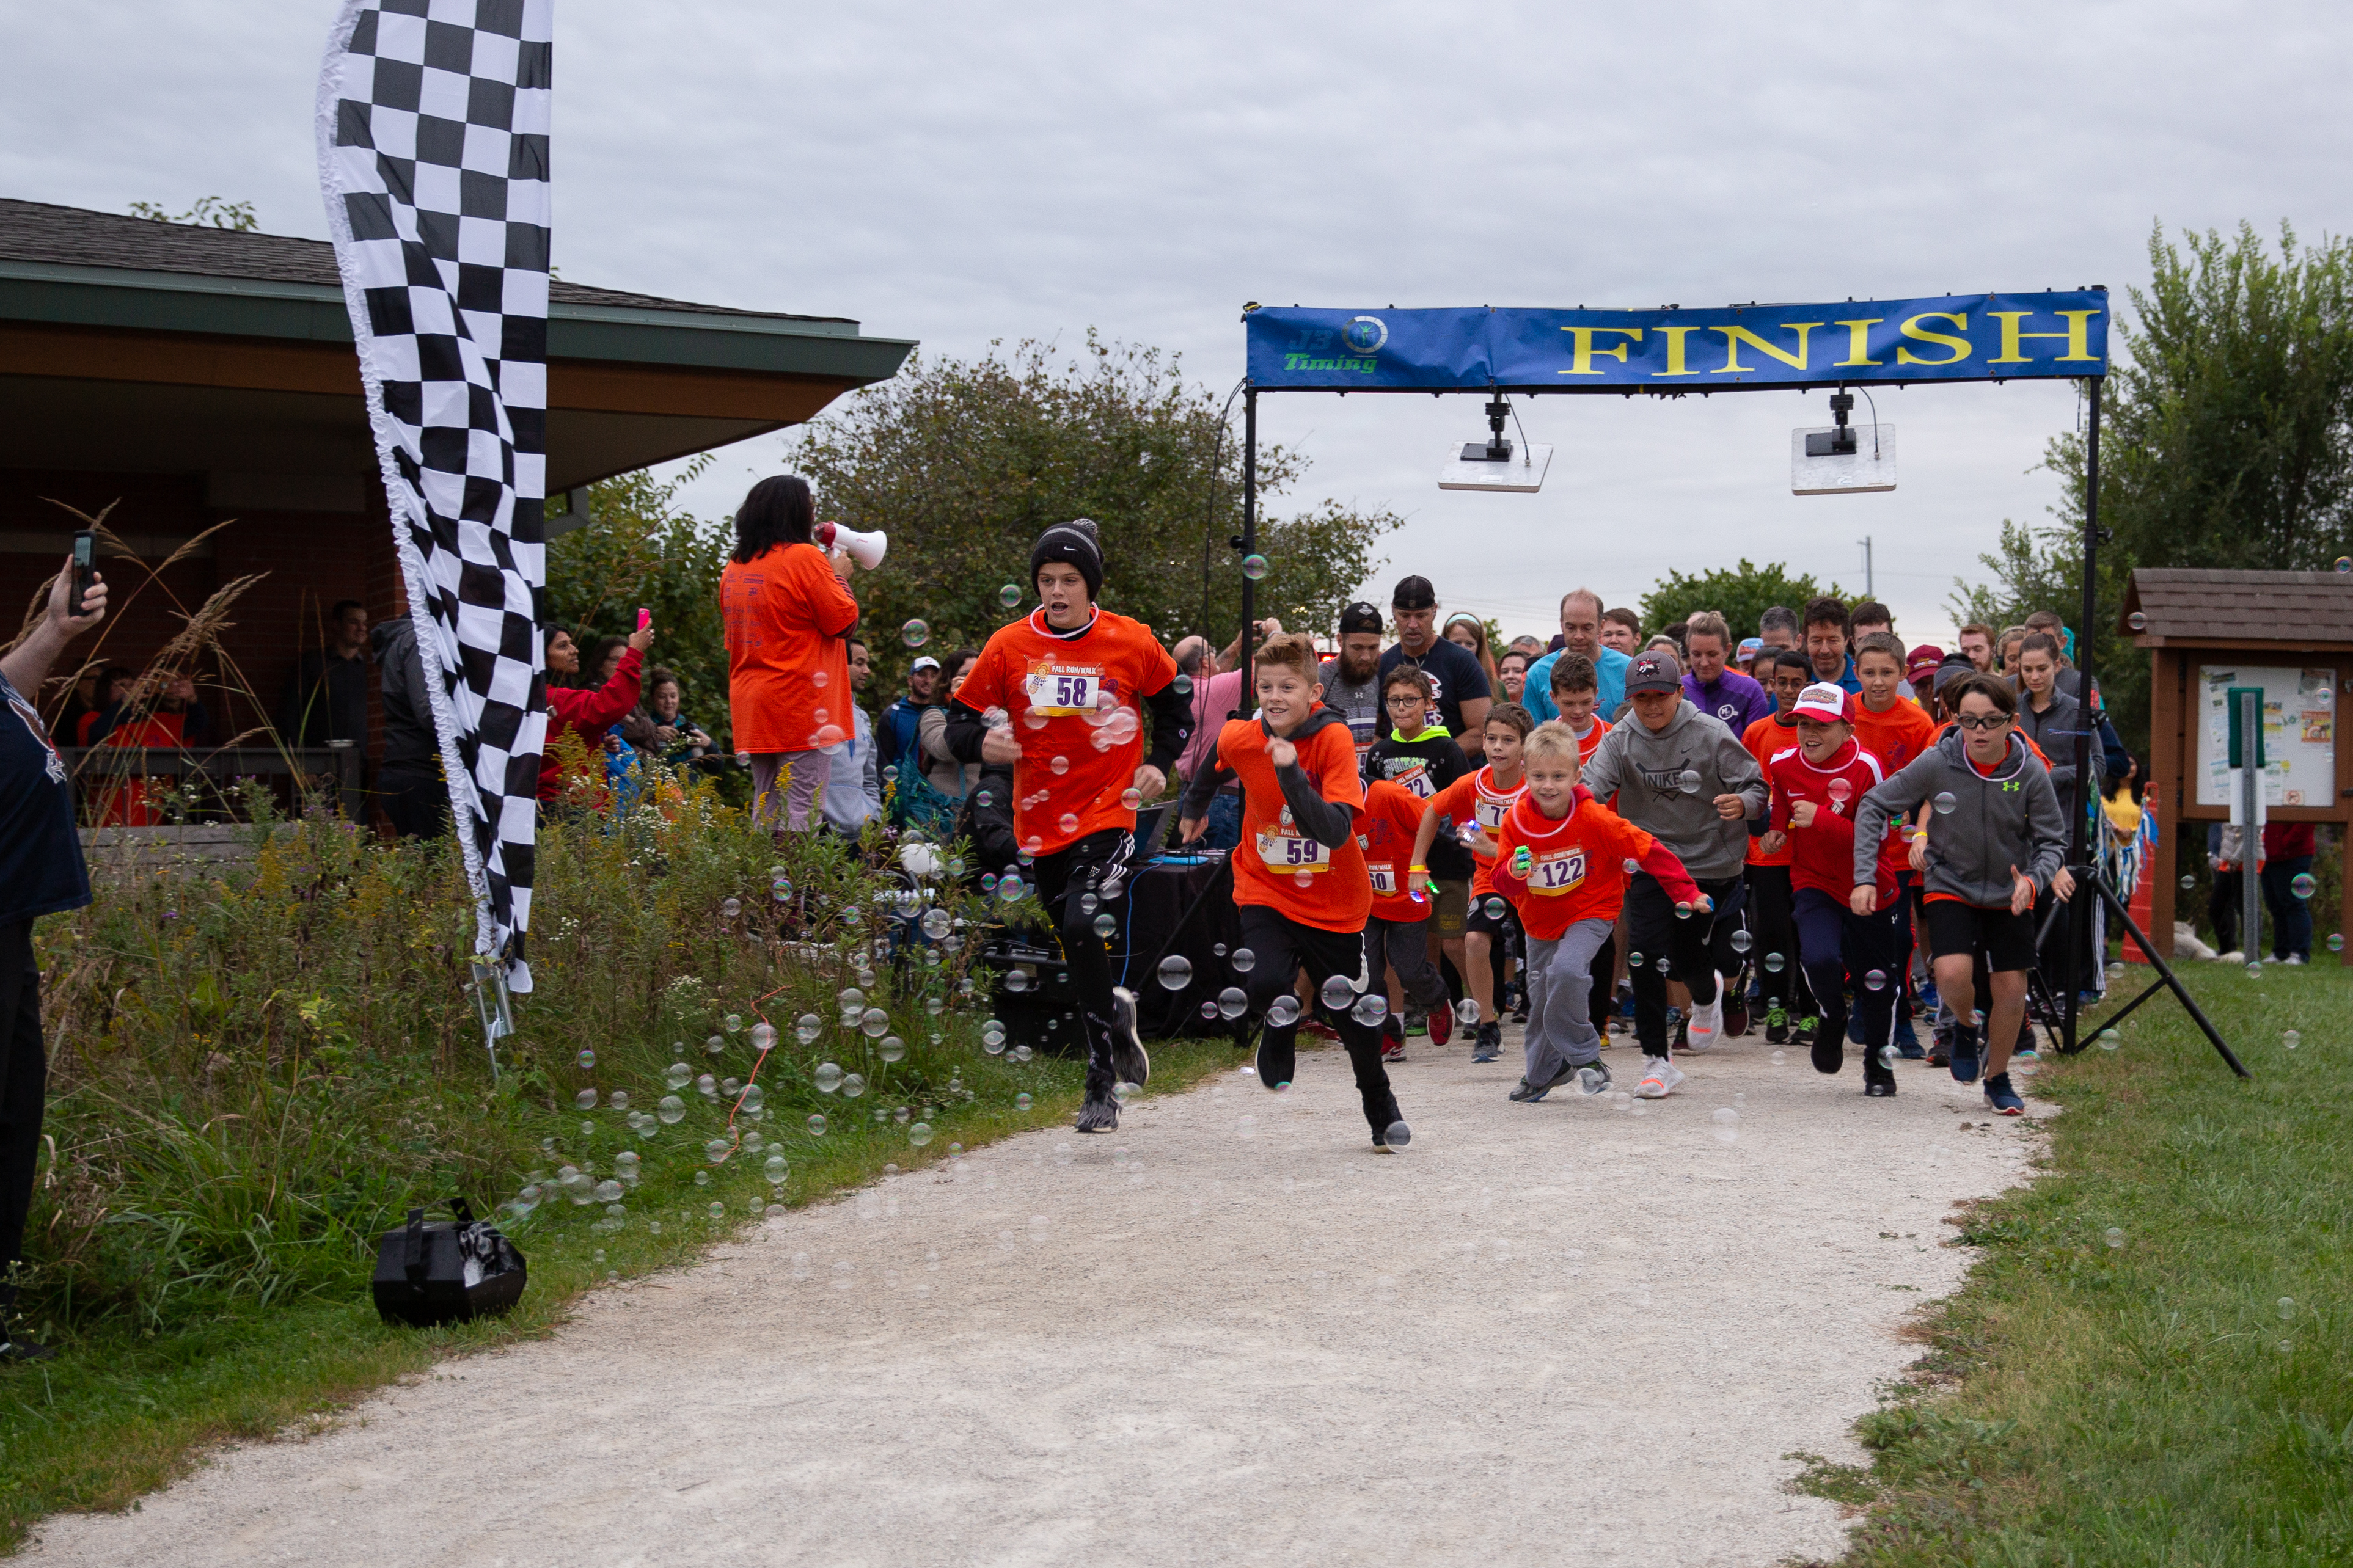 Check Out Photos From the Fall 5K Run/Walk